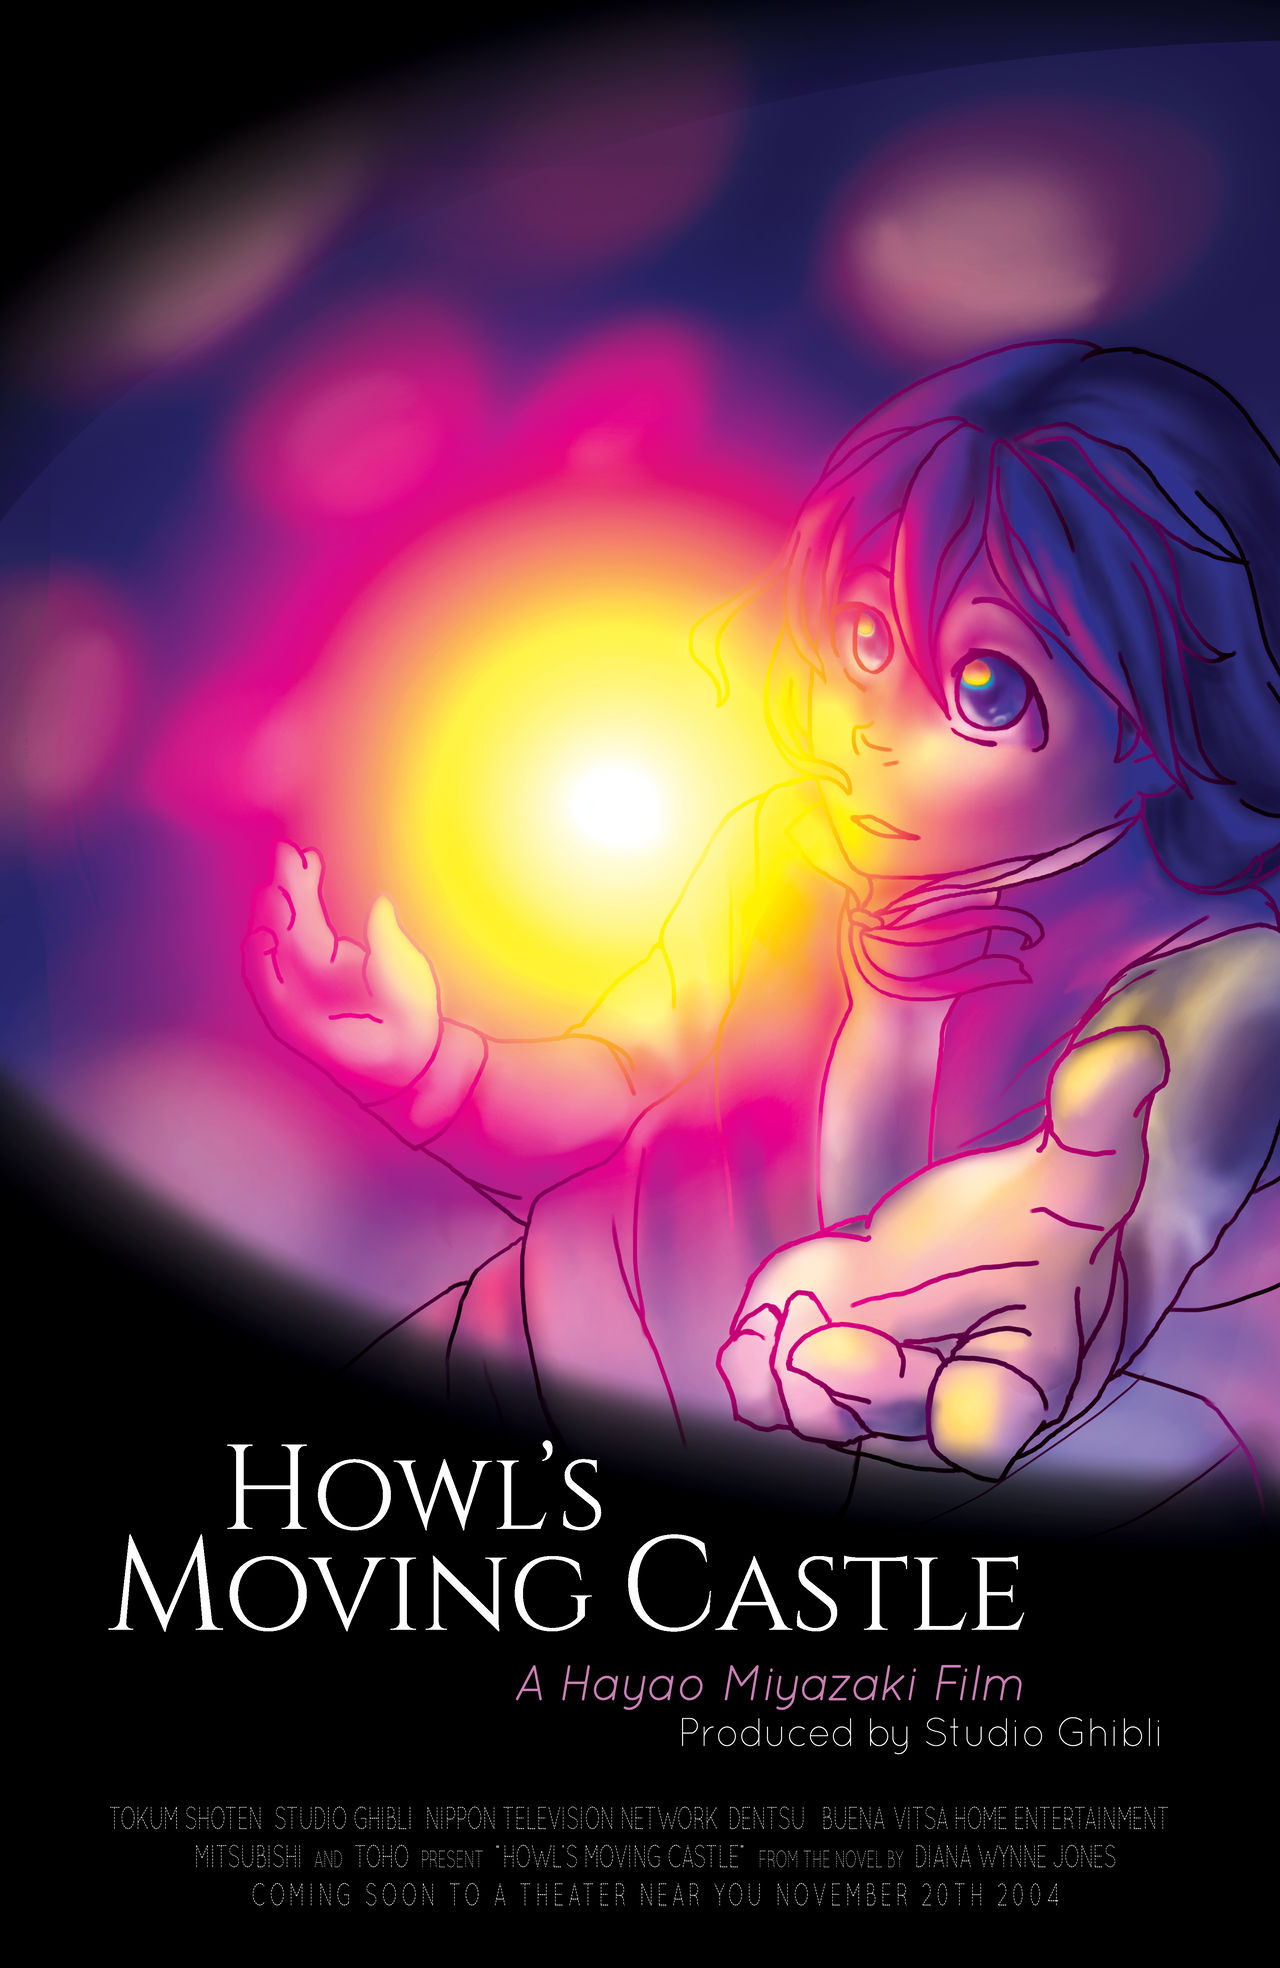 47 Top Pictures Howls Moving Castle Movie Poster : Howls moving Castle Live action movie poster | Studio ...